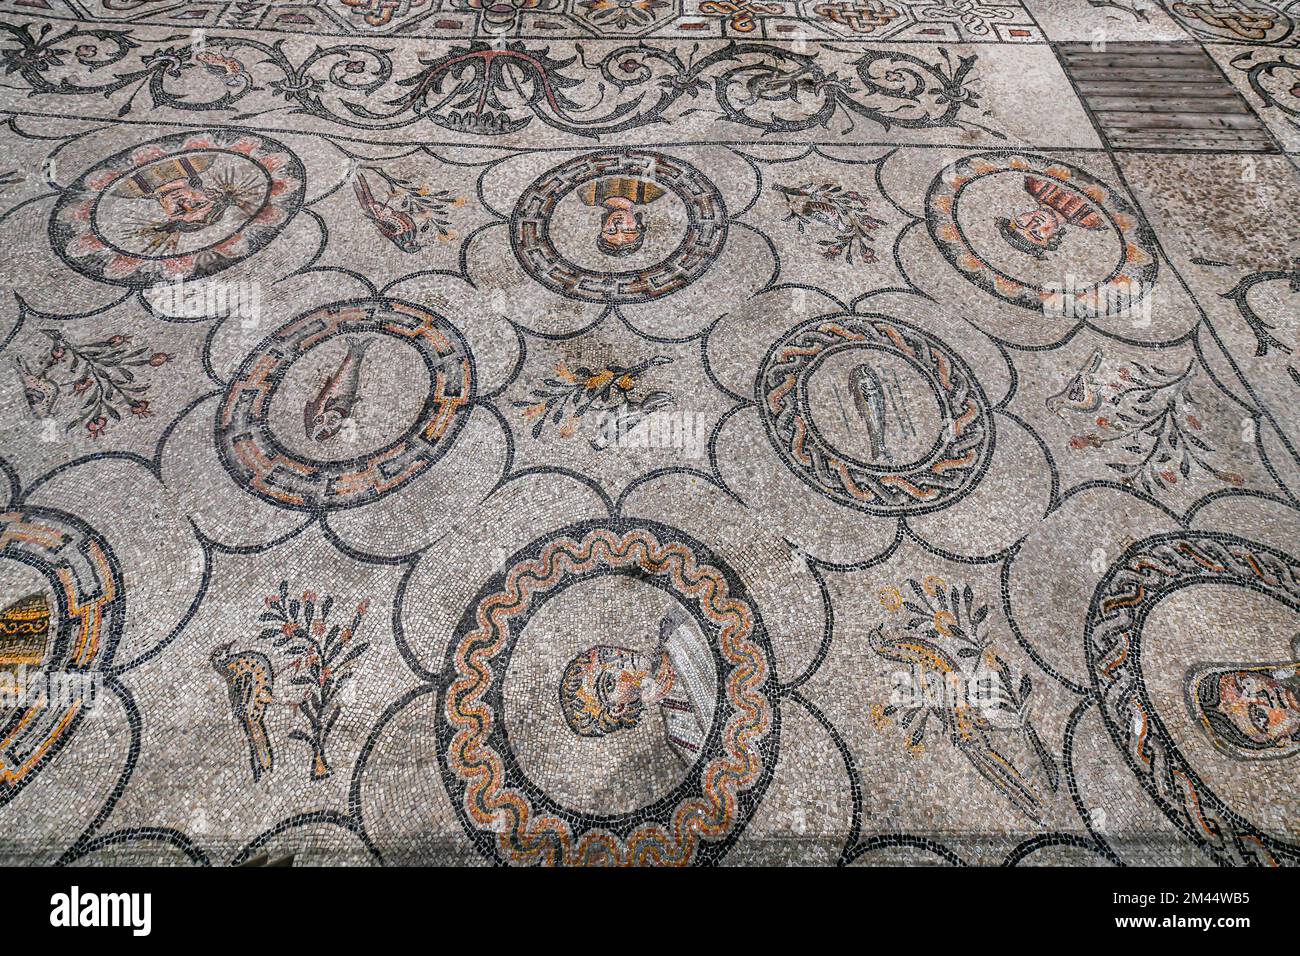 Interior of the cathedral with the mosaic, Unesco world heritage site Aquileia, Italy Stock Photo